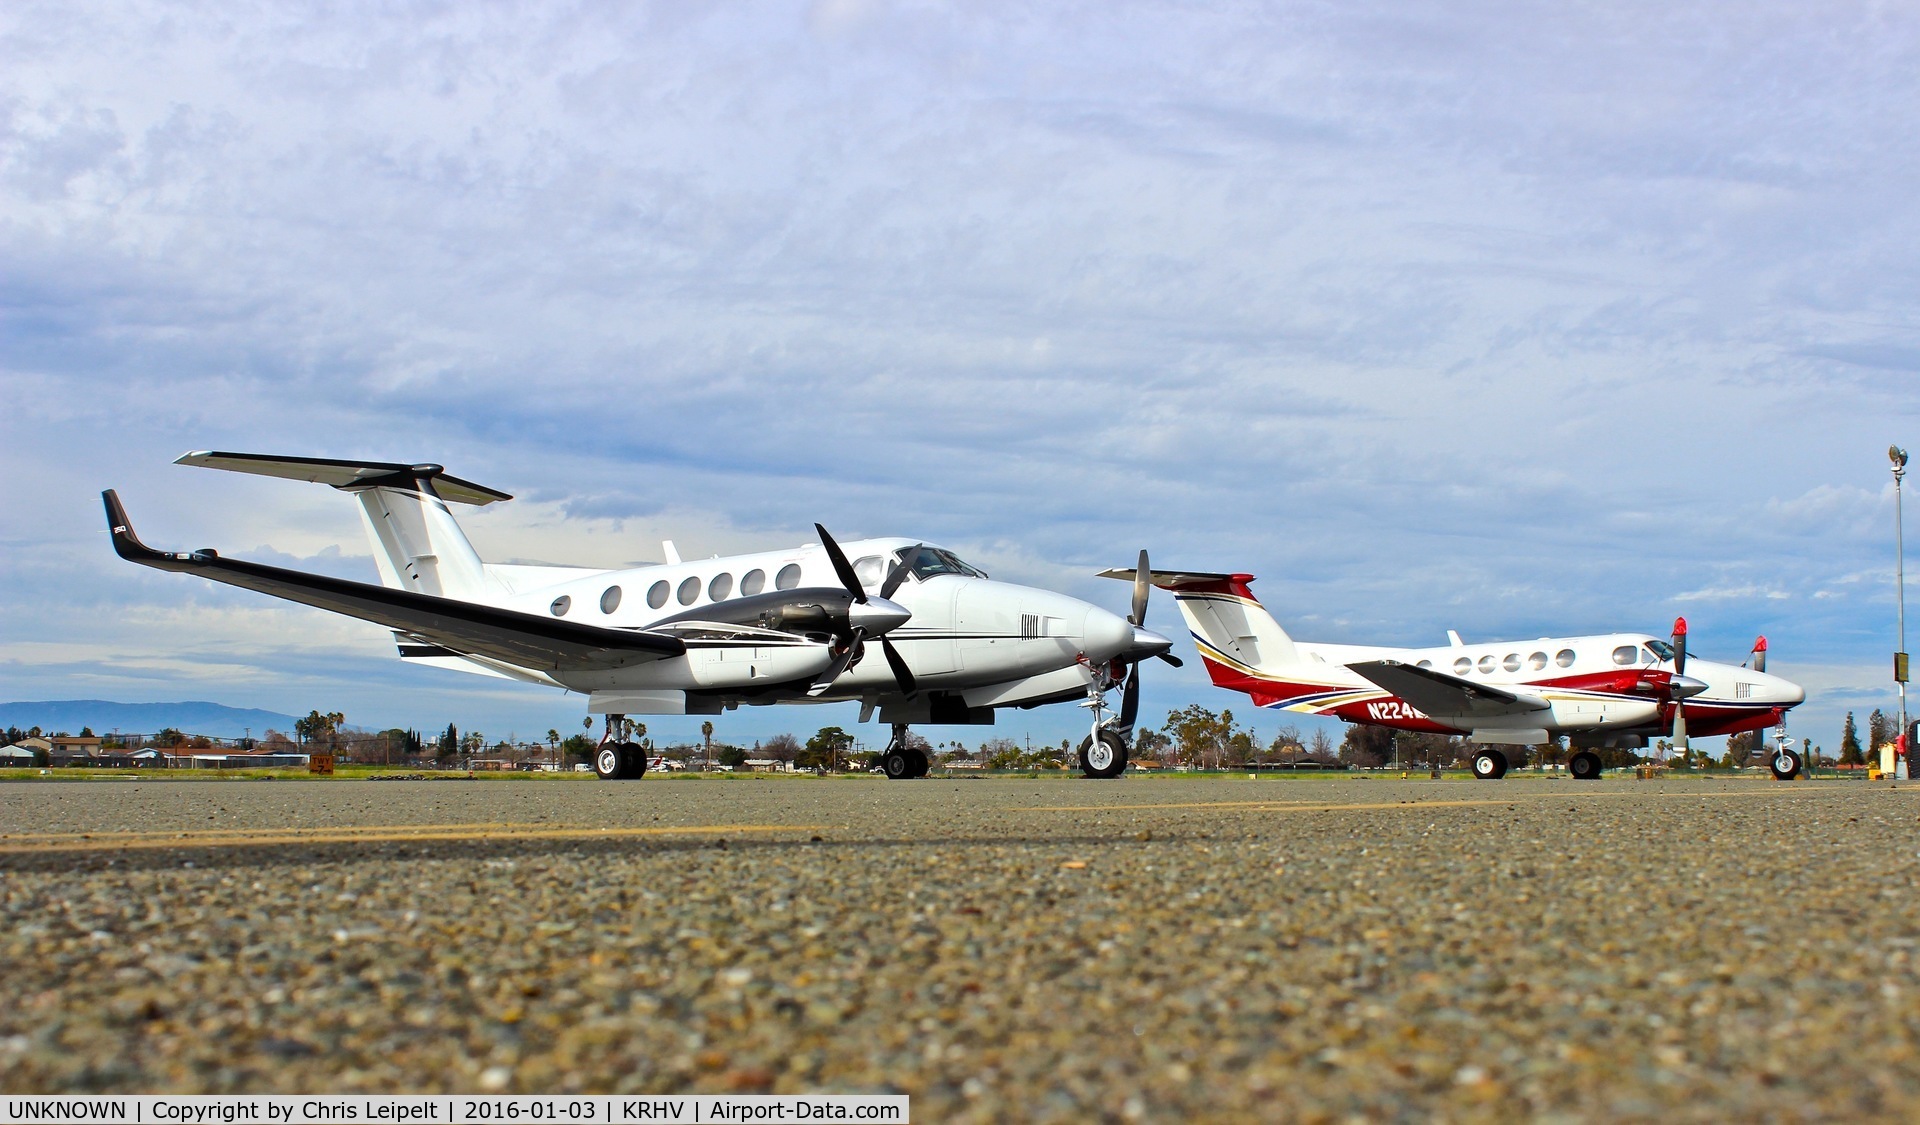 UNKNOWN, Beech King Air 250 C/N Not known, Two King Airs parked next to each other, both for a 49er football game at Reid Hillview Airport, San Jose, CA. One is a King Air 250 from Central California and one is a King Air 200 from Southern California. No tail numbers on aircraft as per request.